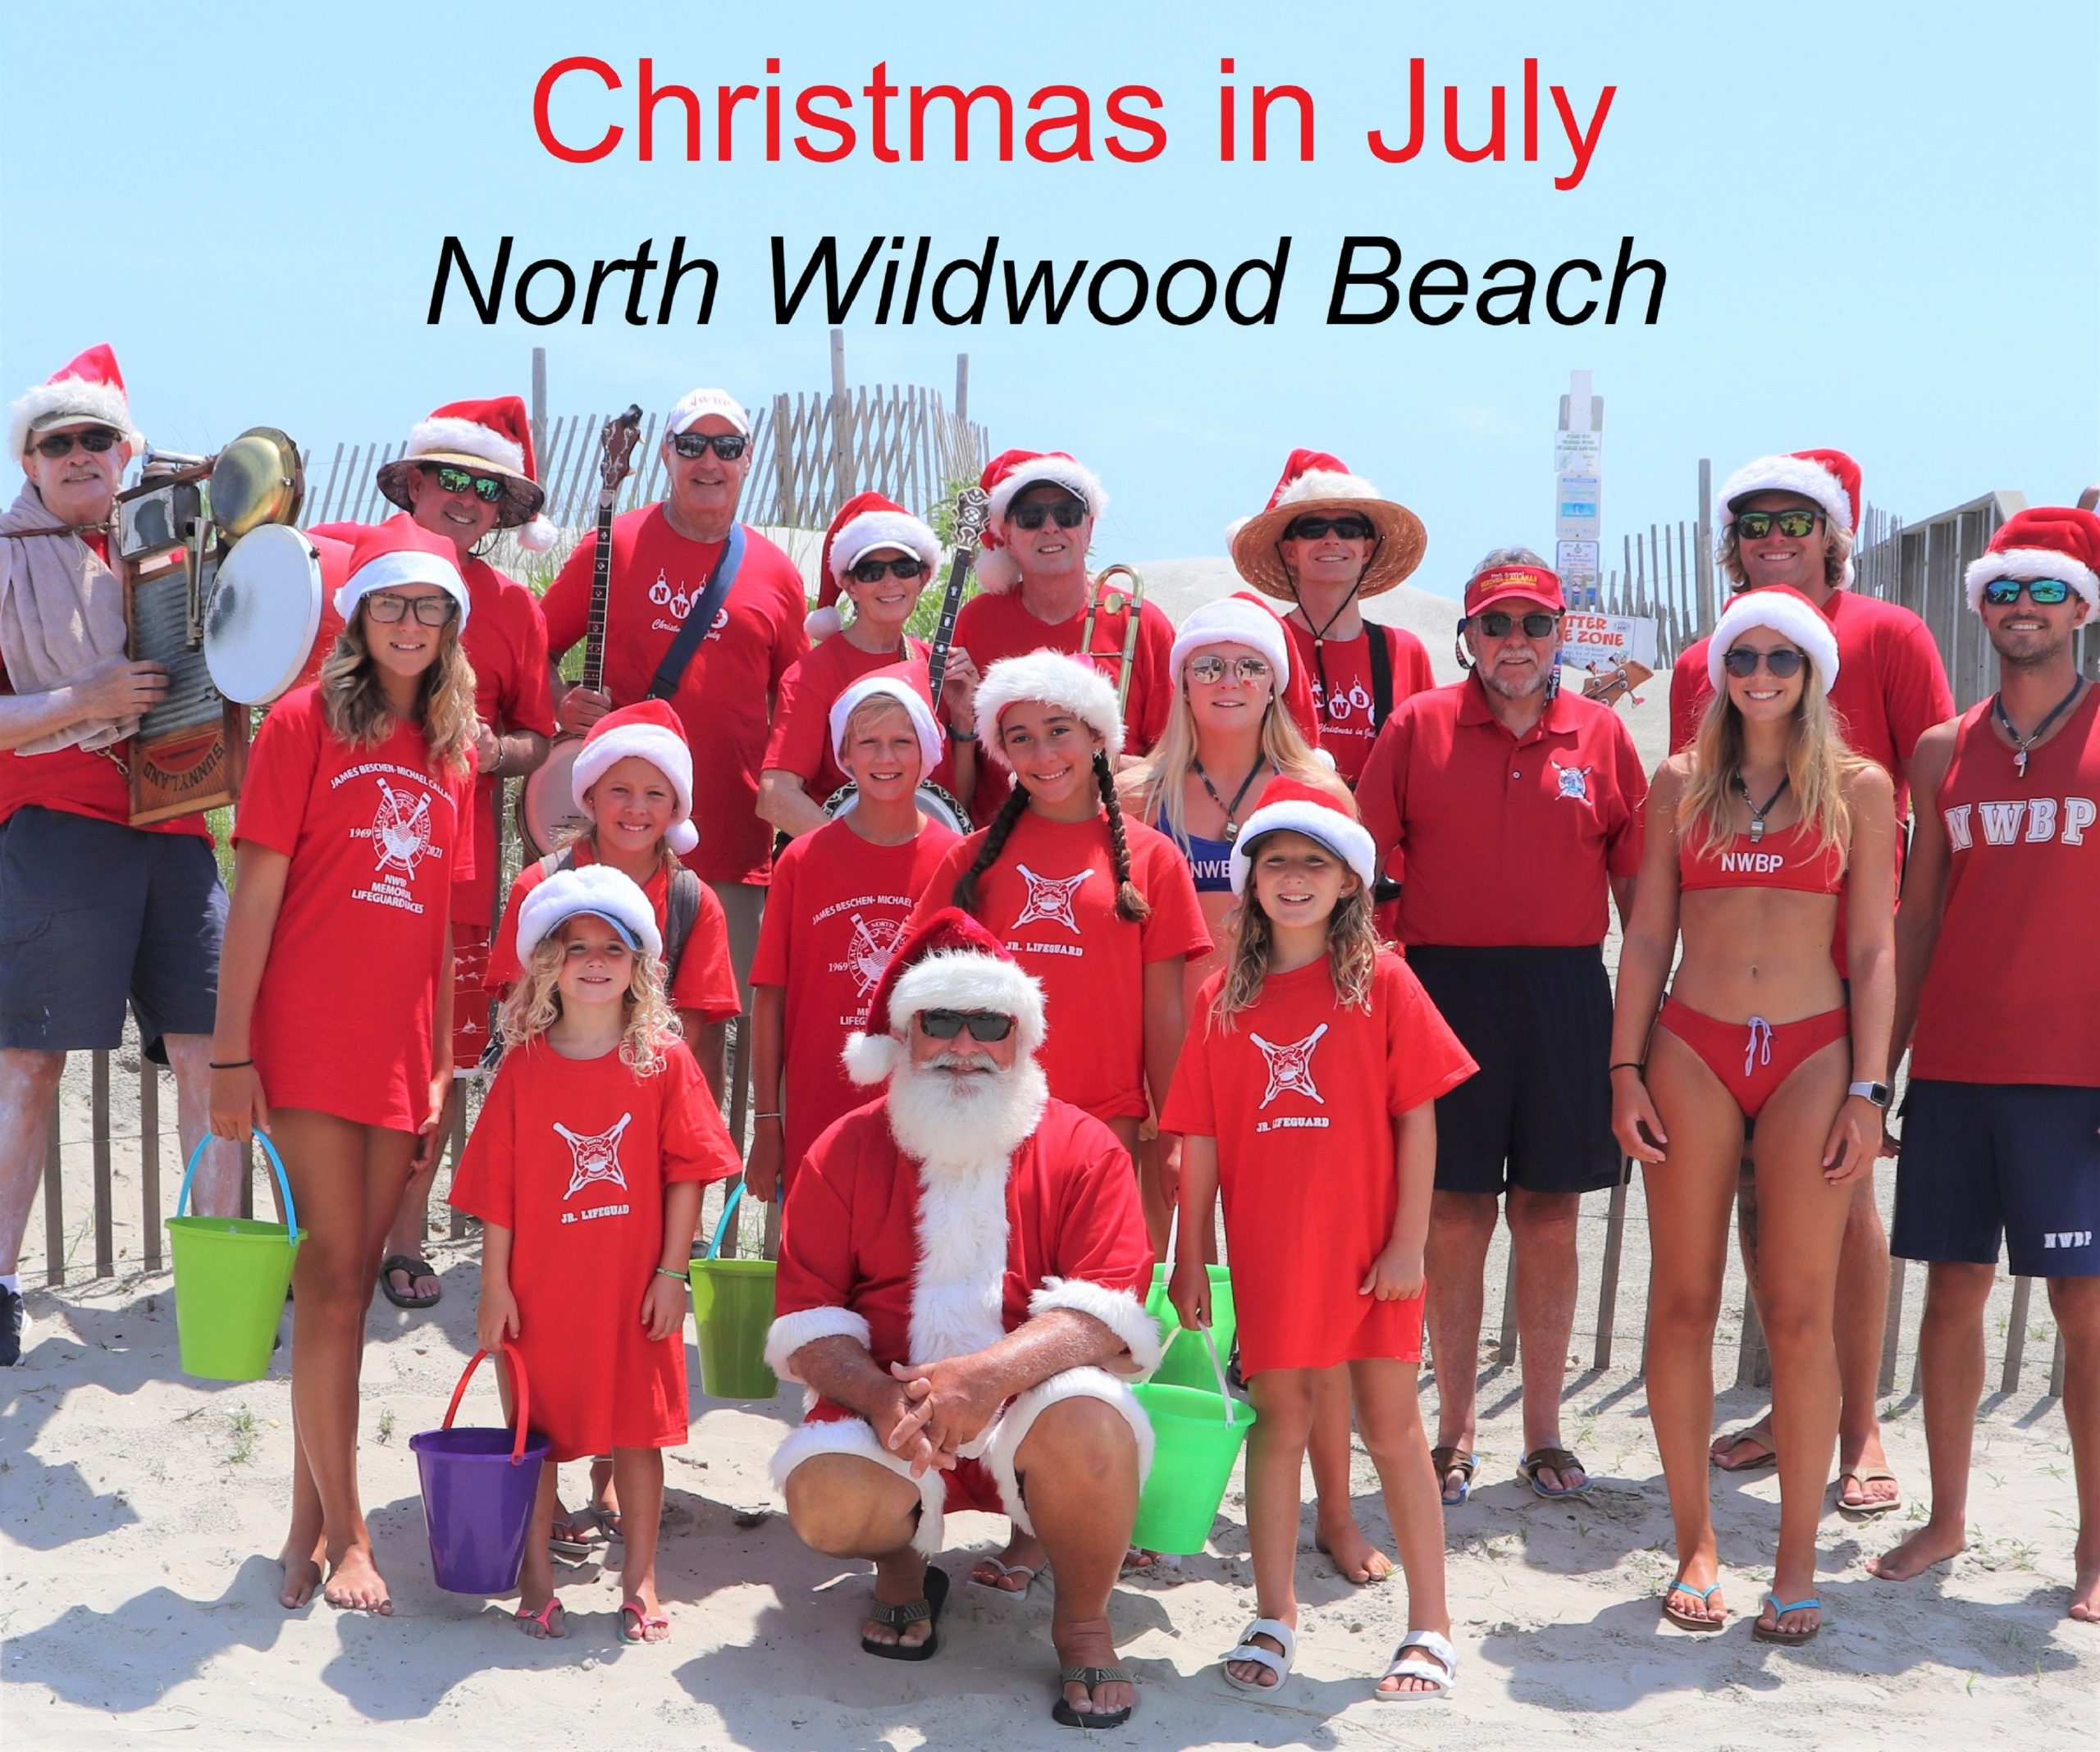 North Wildwood Christmas in July with Santa Claus The Wildwoods, NJ